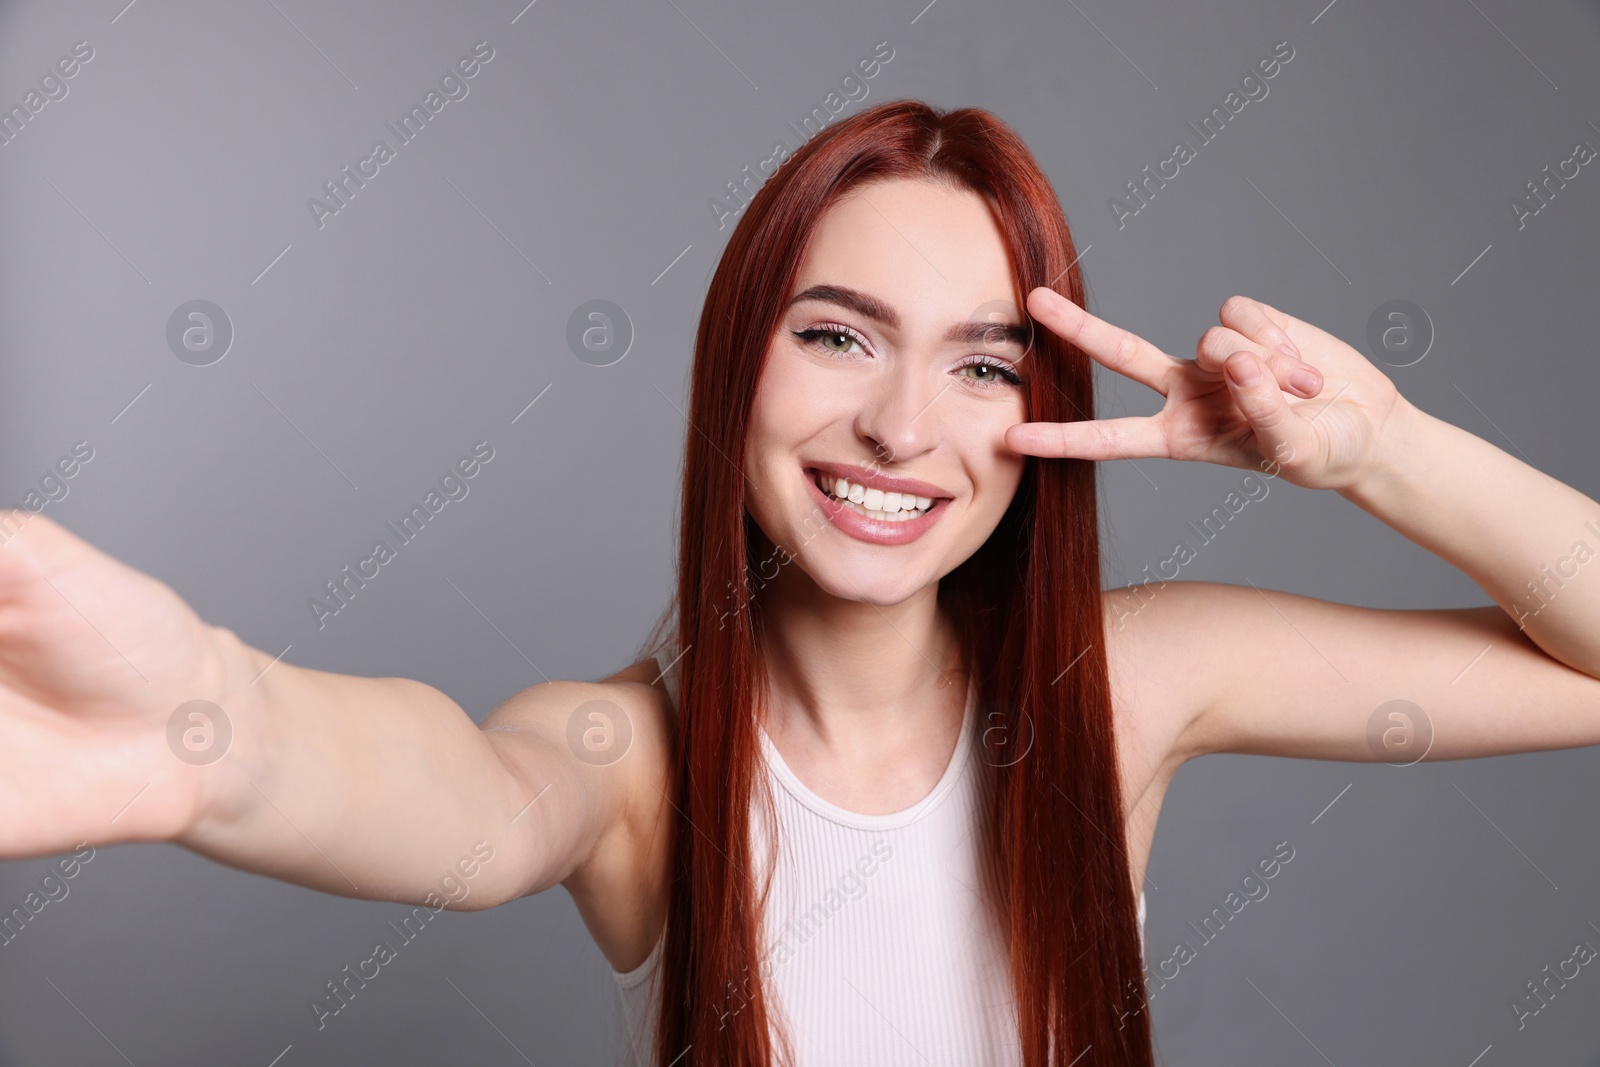 Photo of Happy woman with red dyed hair taking selfie on light gray background